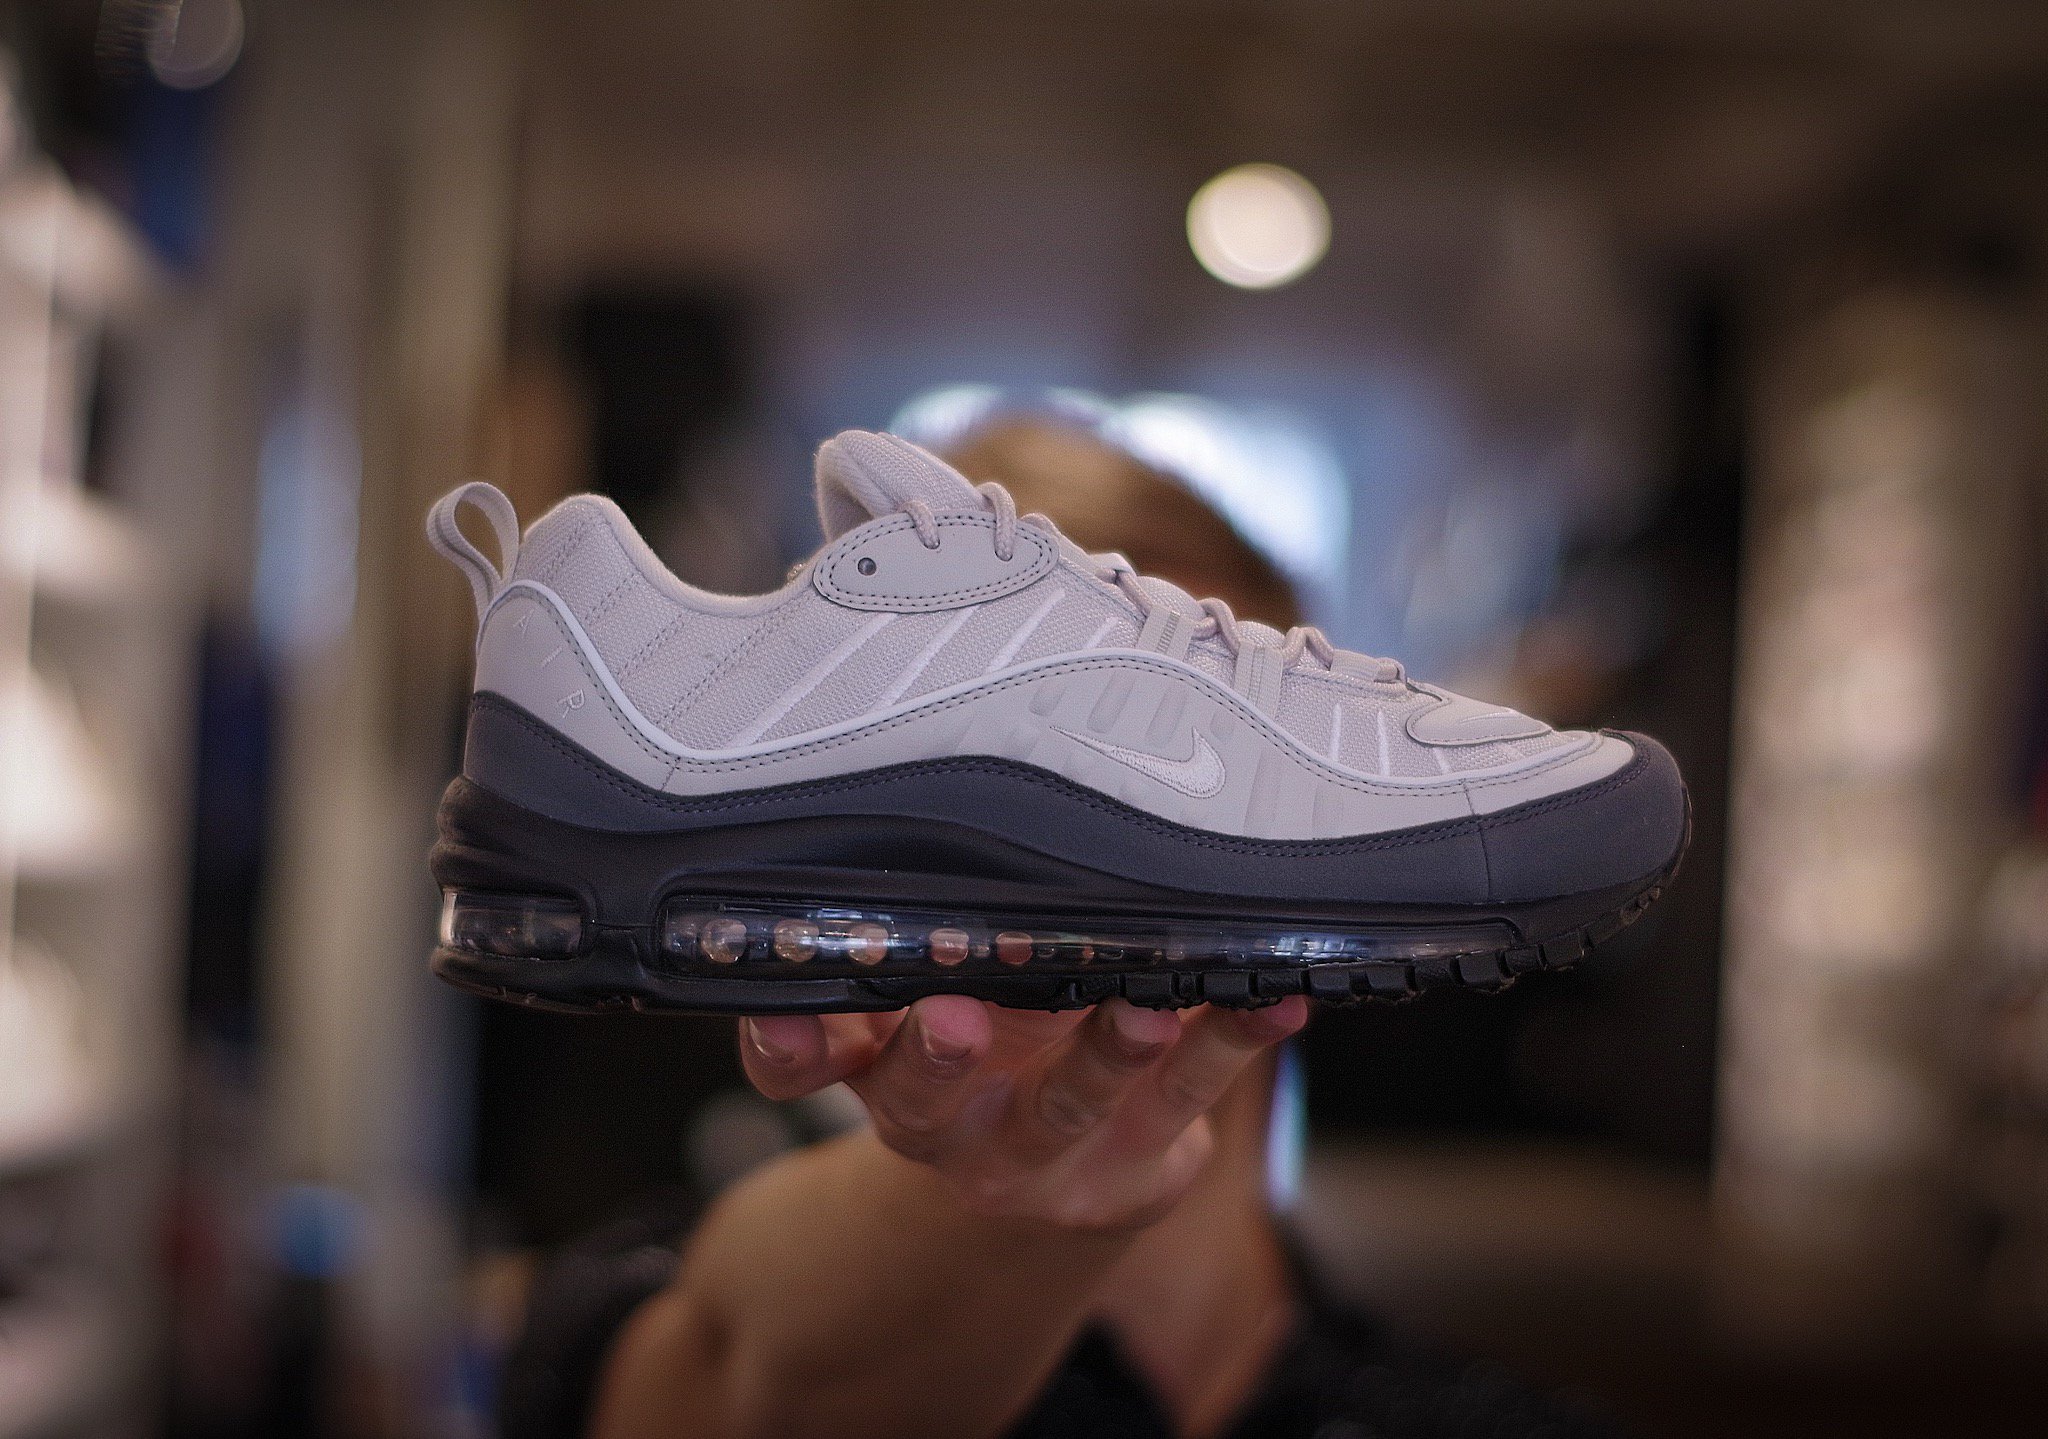 KOSMOS store on Twitter: "The Nike Air Max 98 is in store &amp; online - worldwide shipping! ✨⁠ Shop here -&gt; https://t.co/g1DTO4rEVA https://t.co/gSIYakIy2p" / Twitter